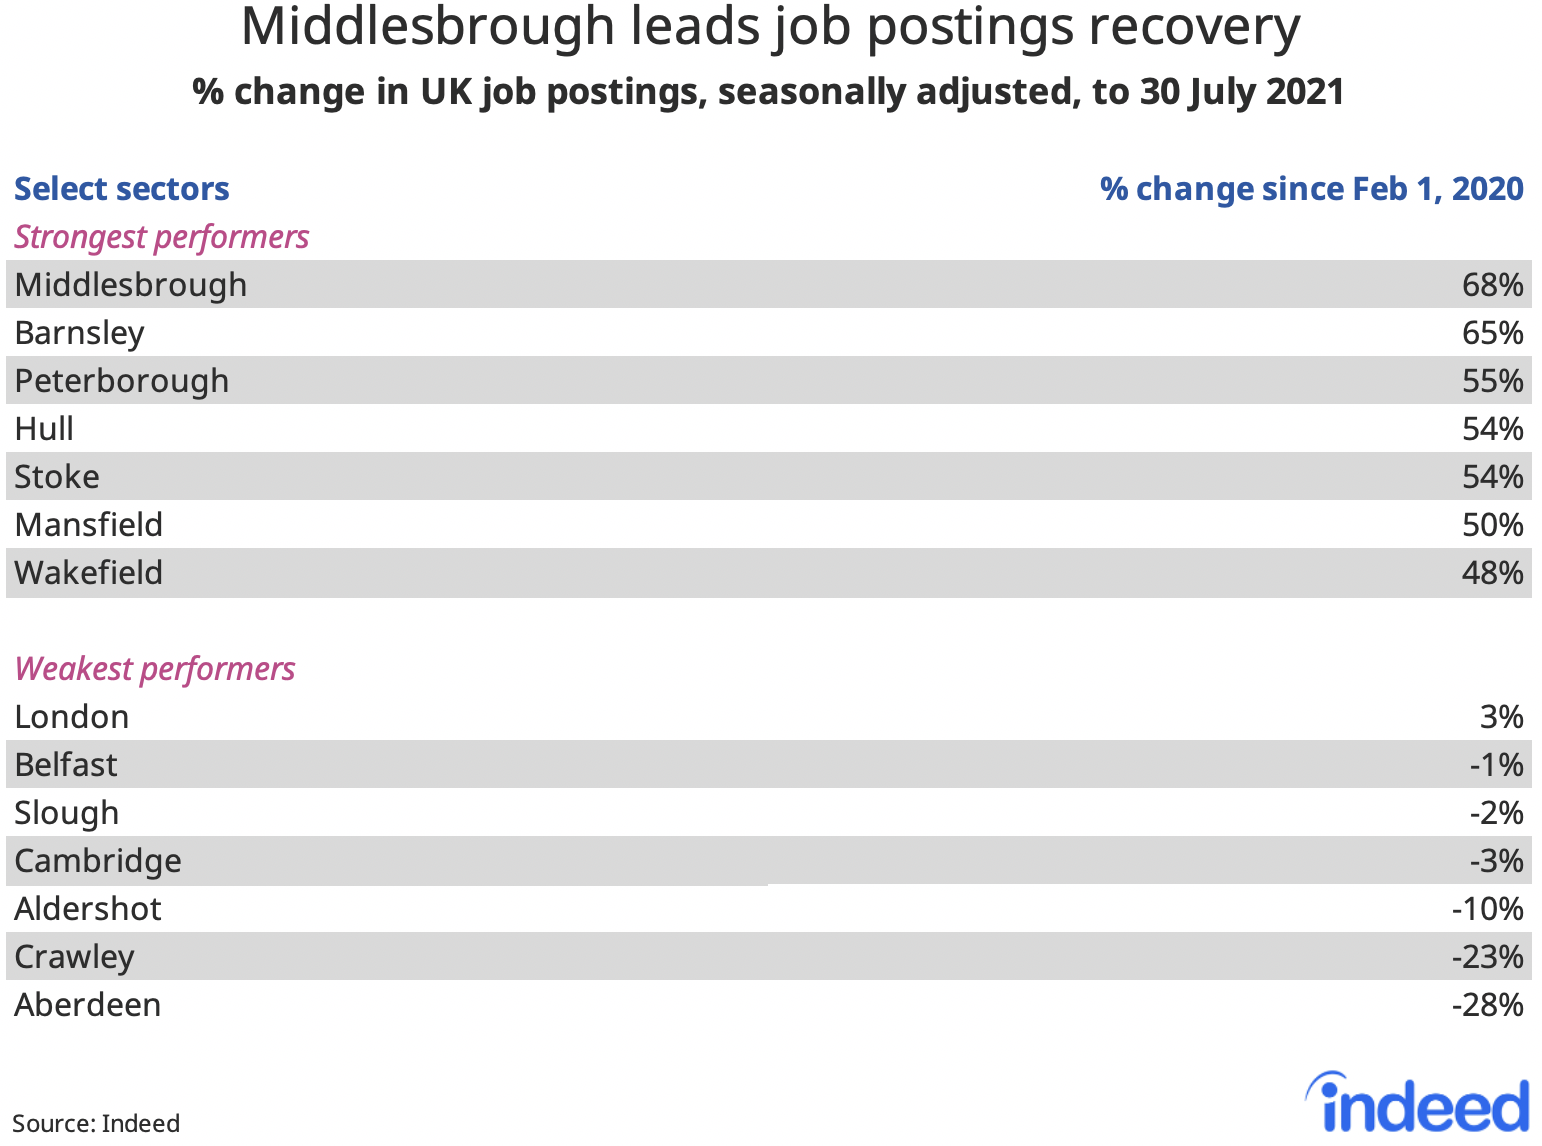 Table titled “Middlesbrough leads job postings recovery.”